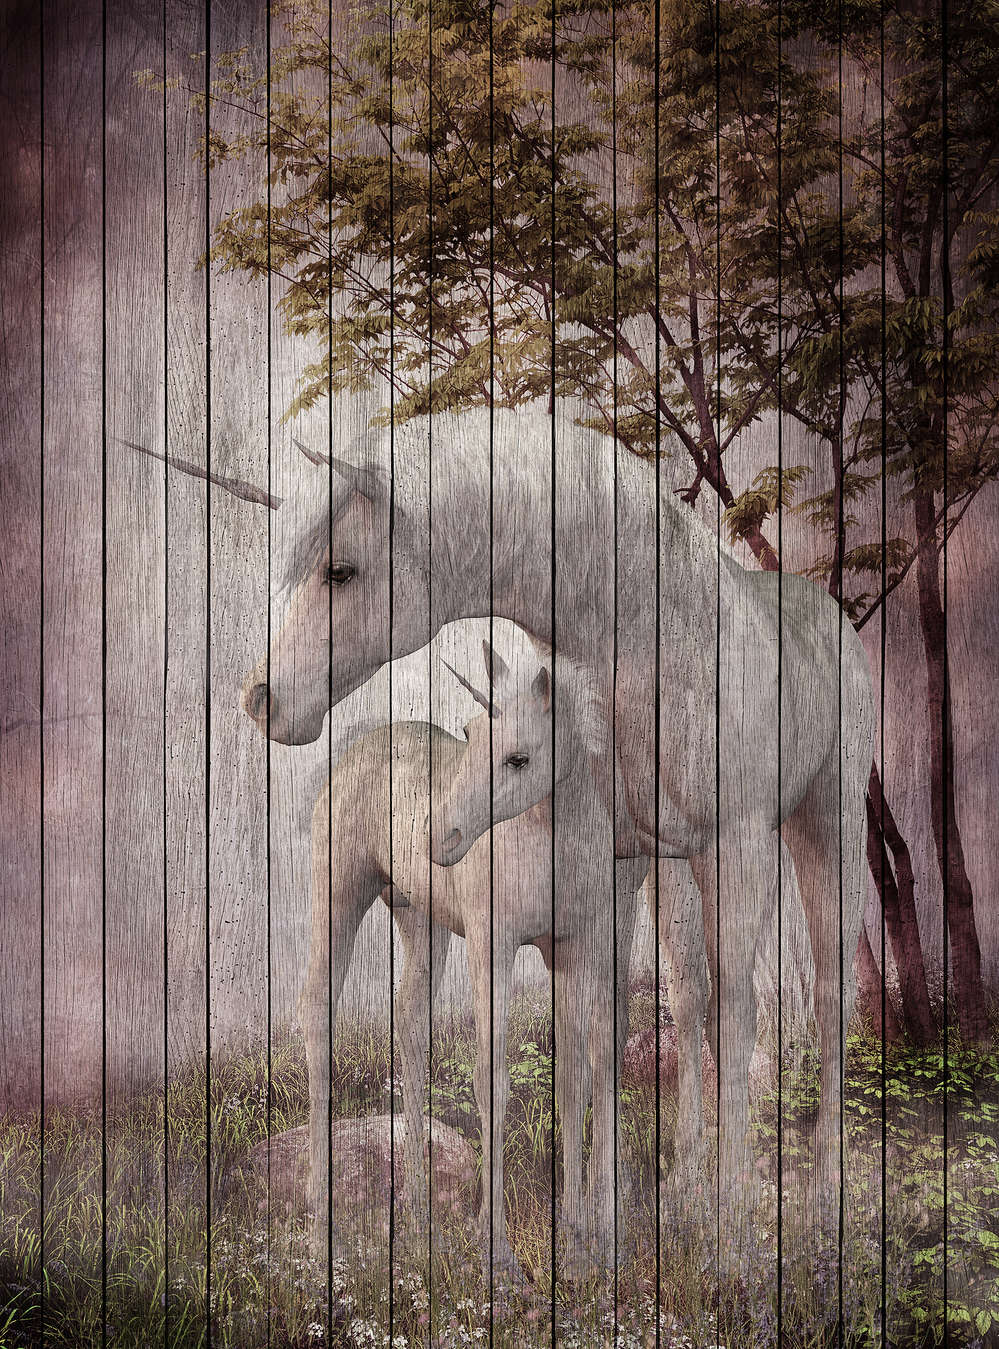             Fantasy 4 - Unicorn & Wood Optic Wallpaper - Beige, Pink | Pearl Smooth Non-woven
        